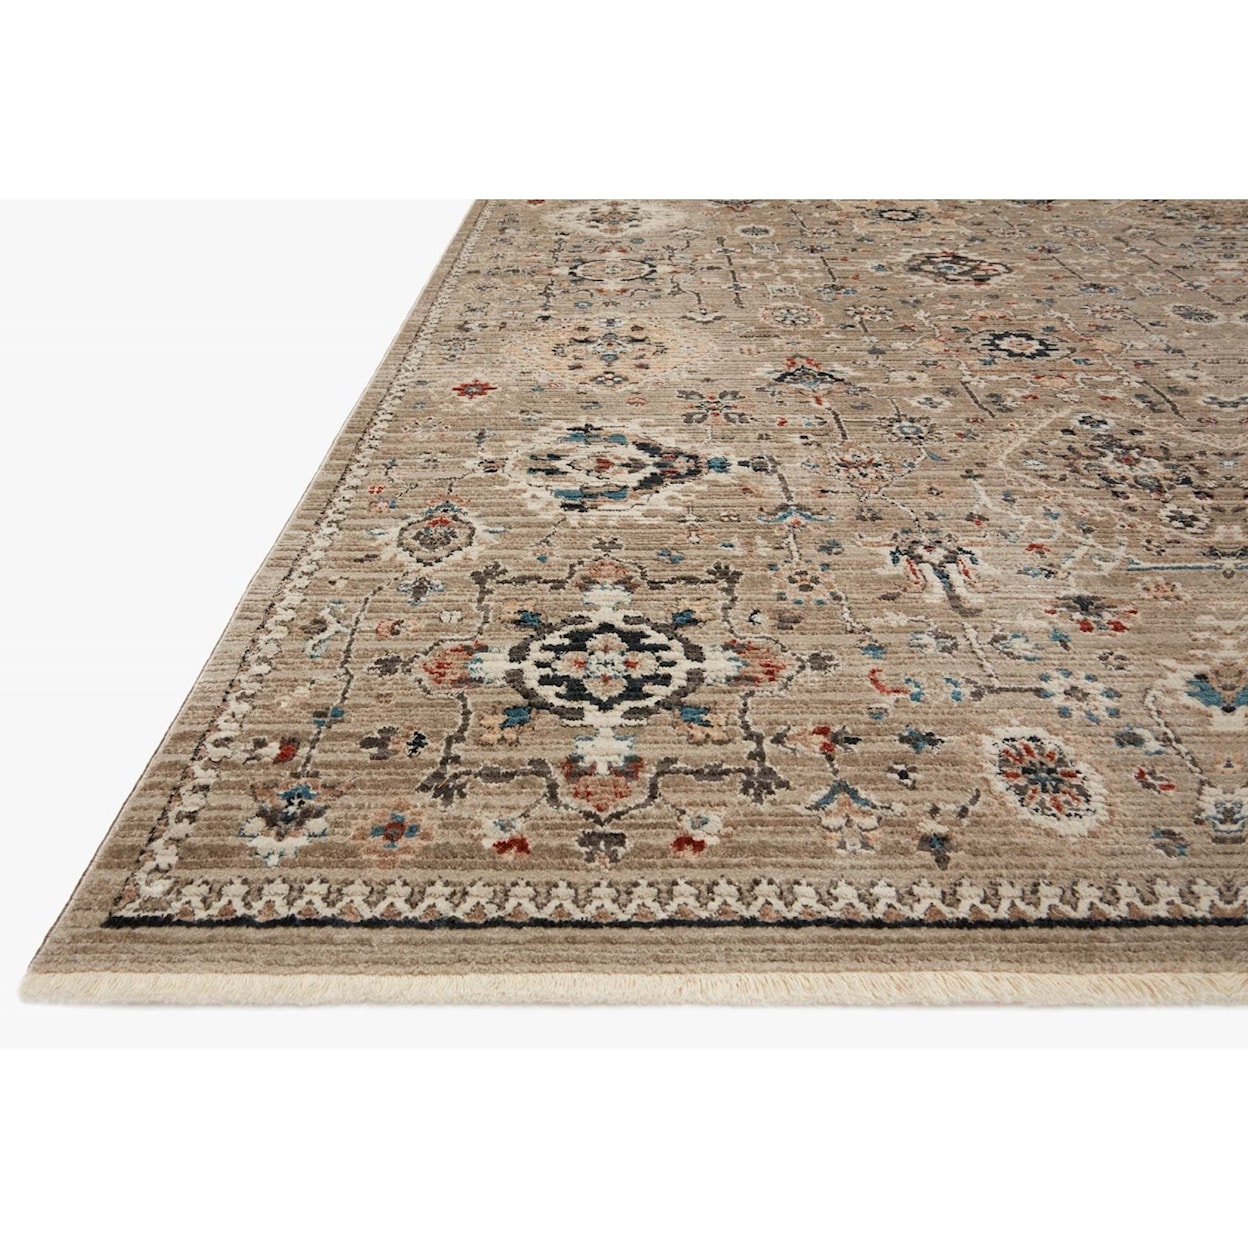 Reeds Rugs Leigh 6'7" x 9'6" Dove / Multi Rug